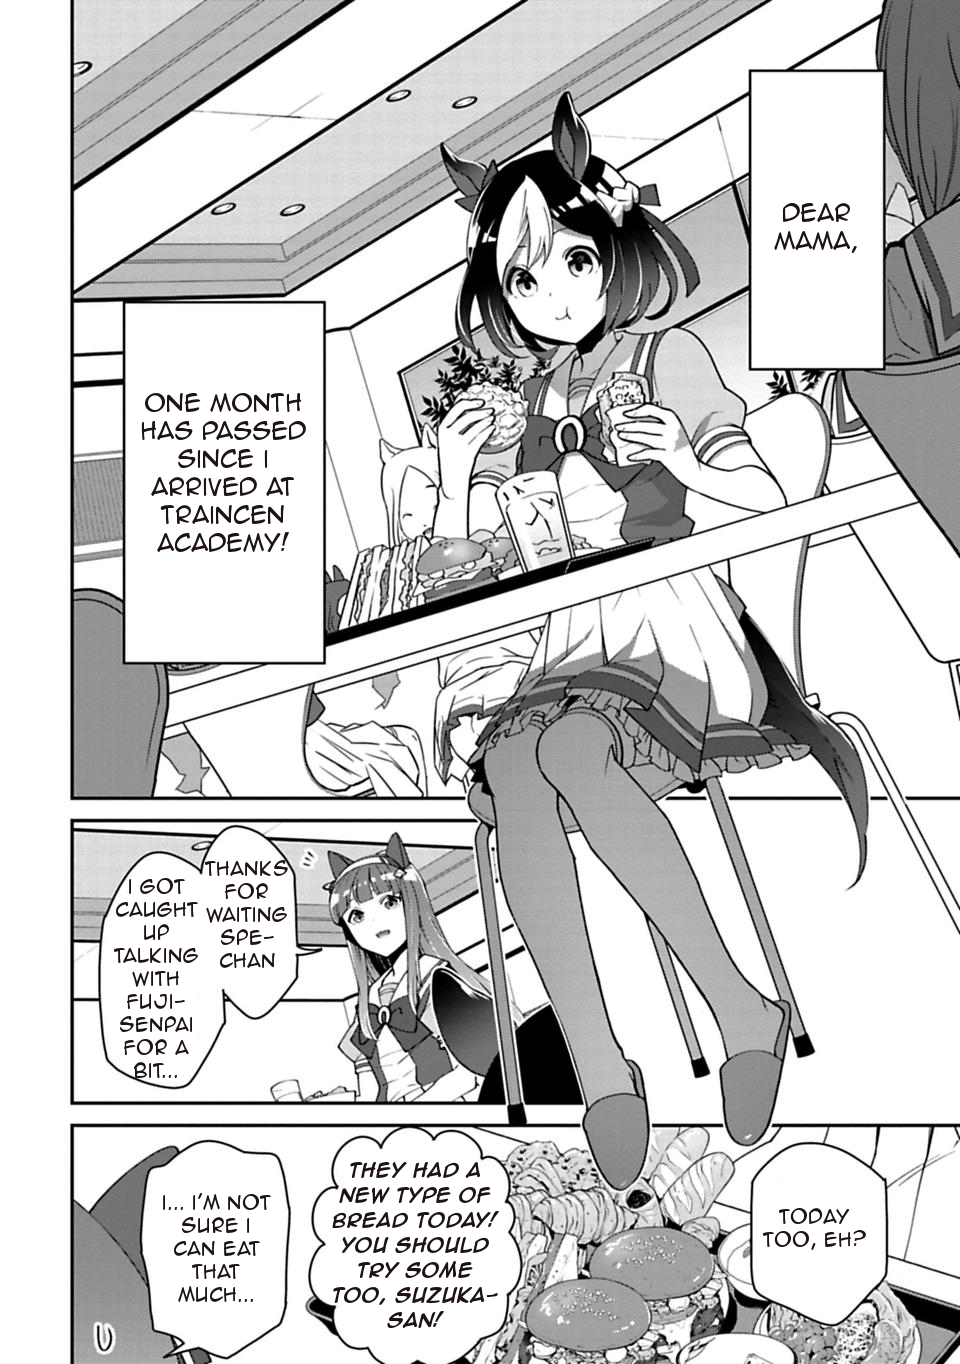 Starting Gate! Uma Musume Pretty Derby Vol.2 Chapter 7: Rivals 1 - Picture 2